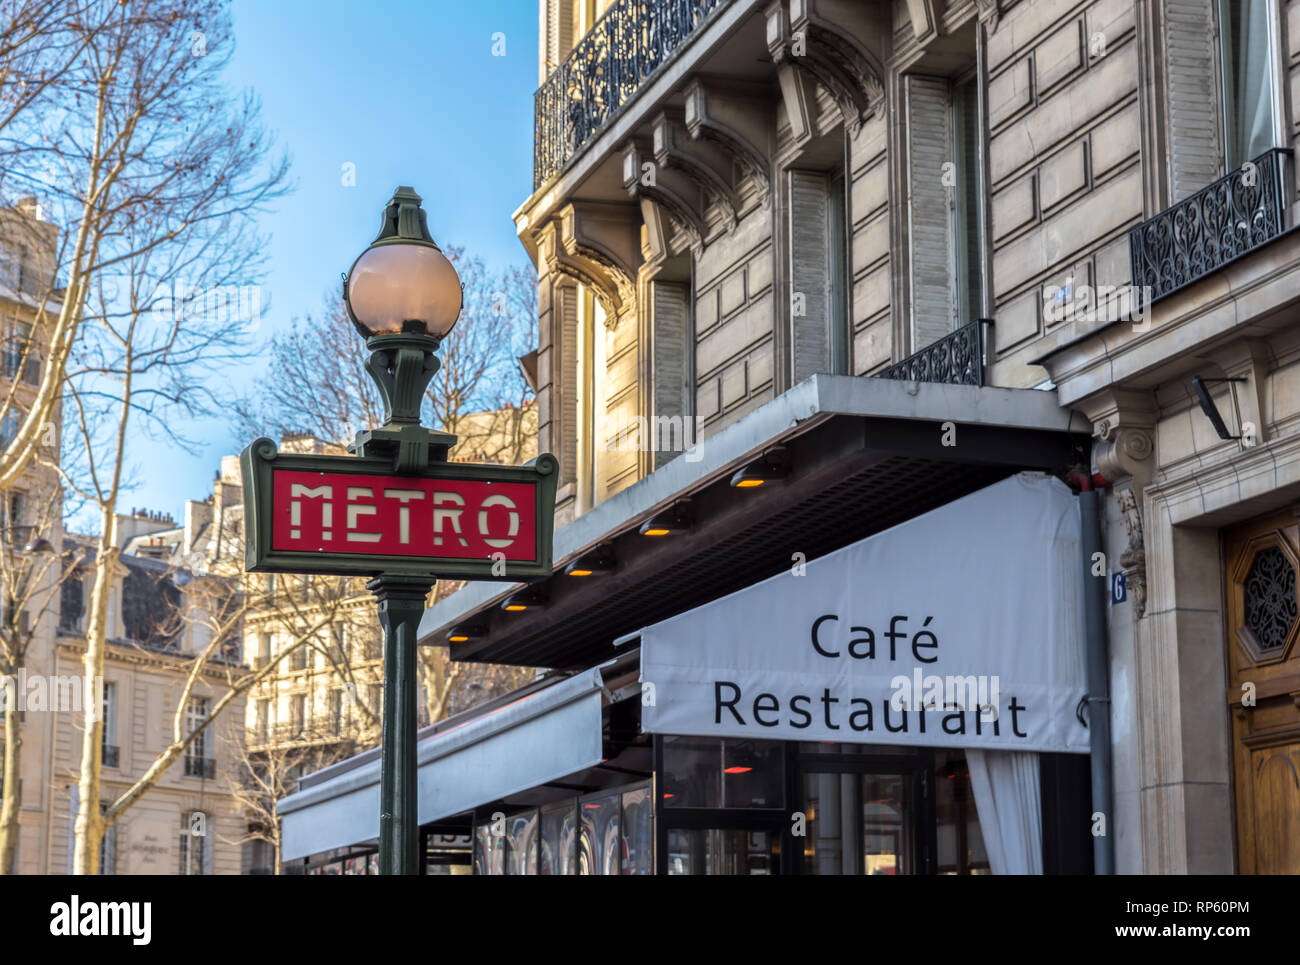 A traditional metro sign in Paris - France Stock Photo